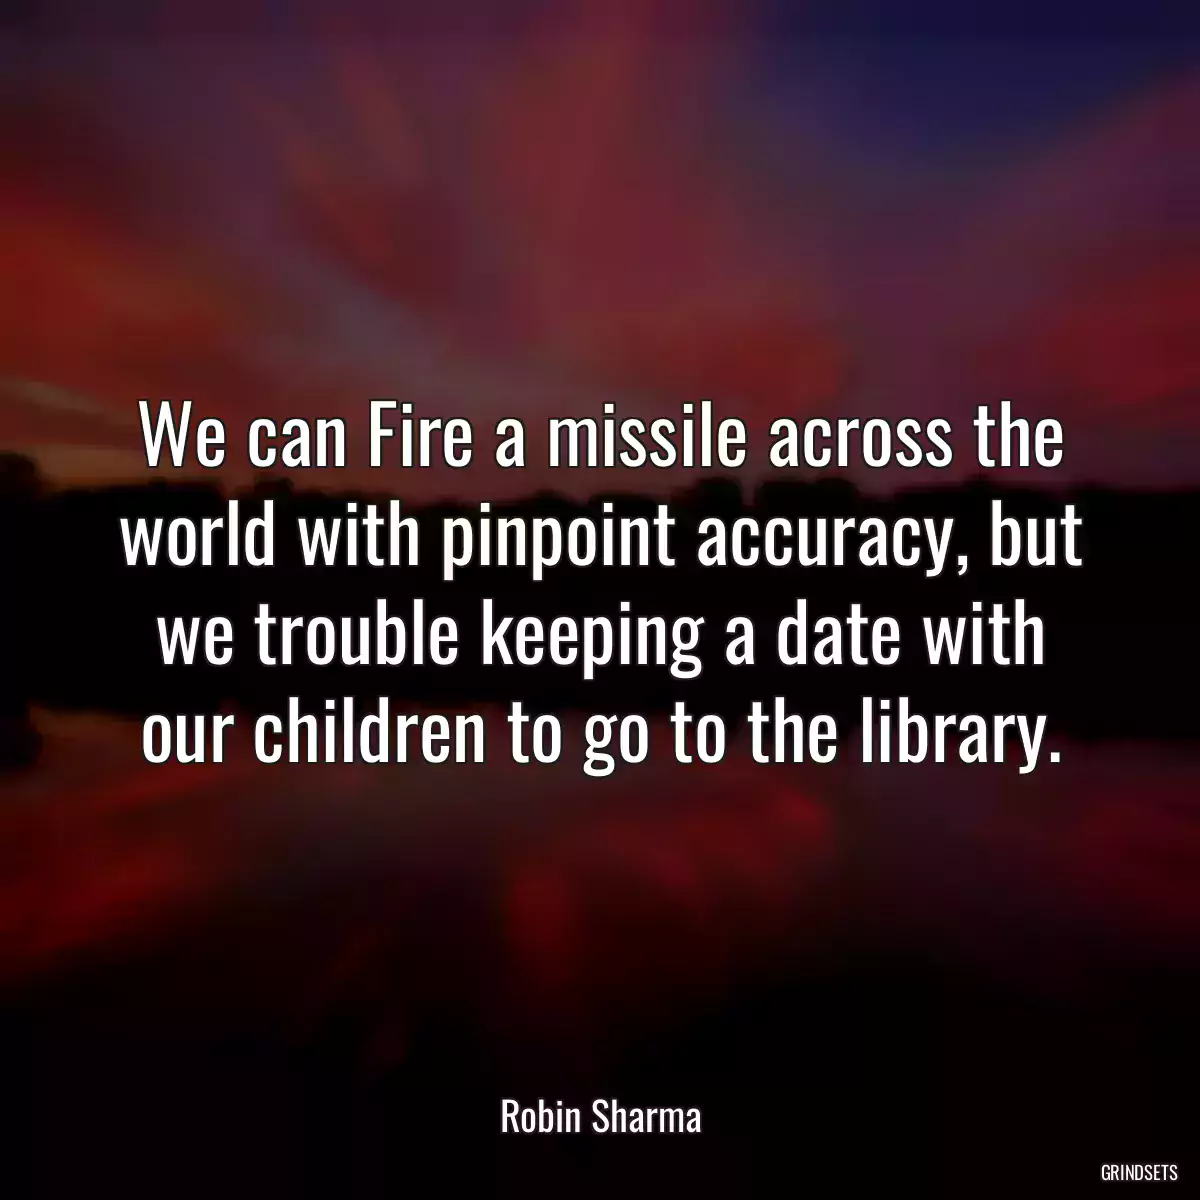 We can Fire a missile across the world with pinpoint accuracy, but we trouble keeping a date with our children to go to the library.